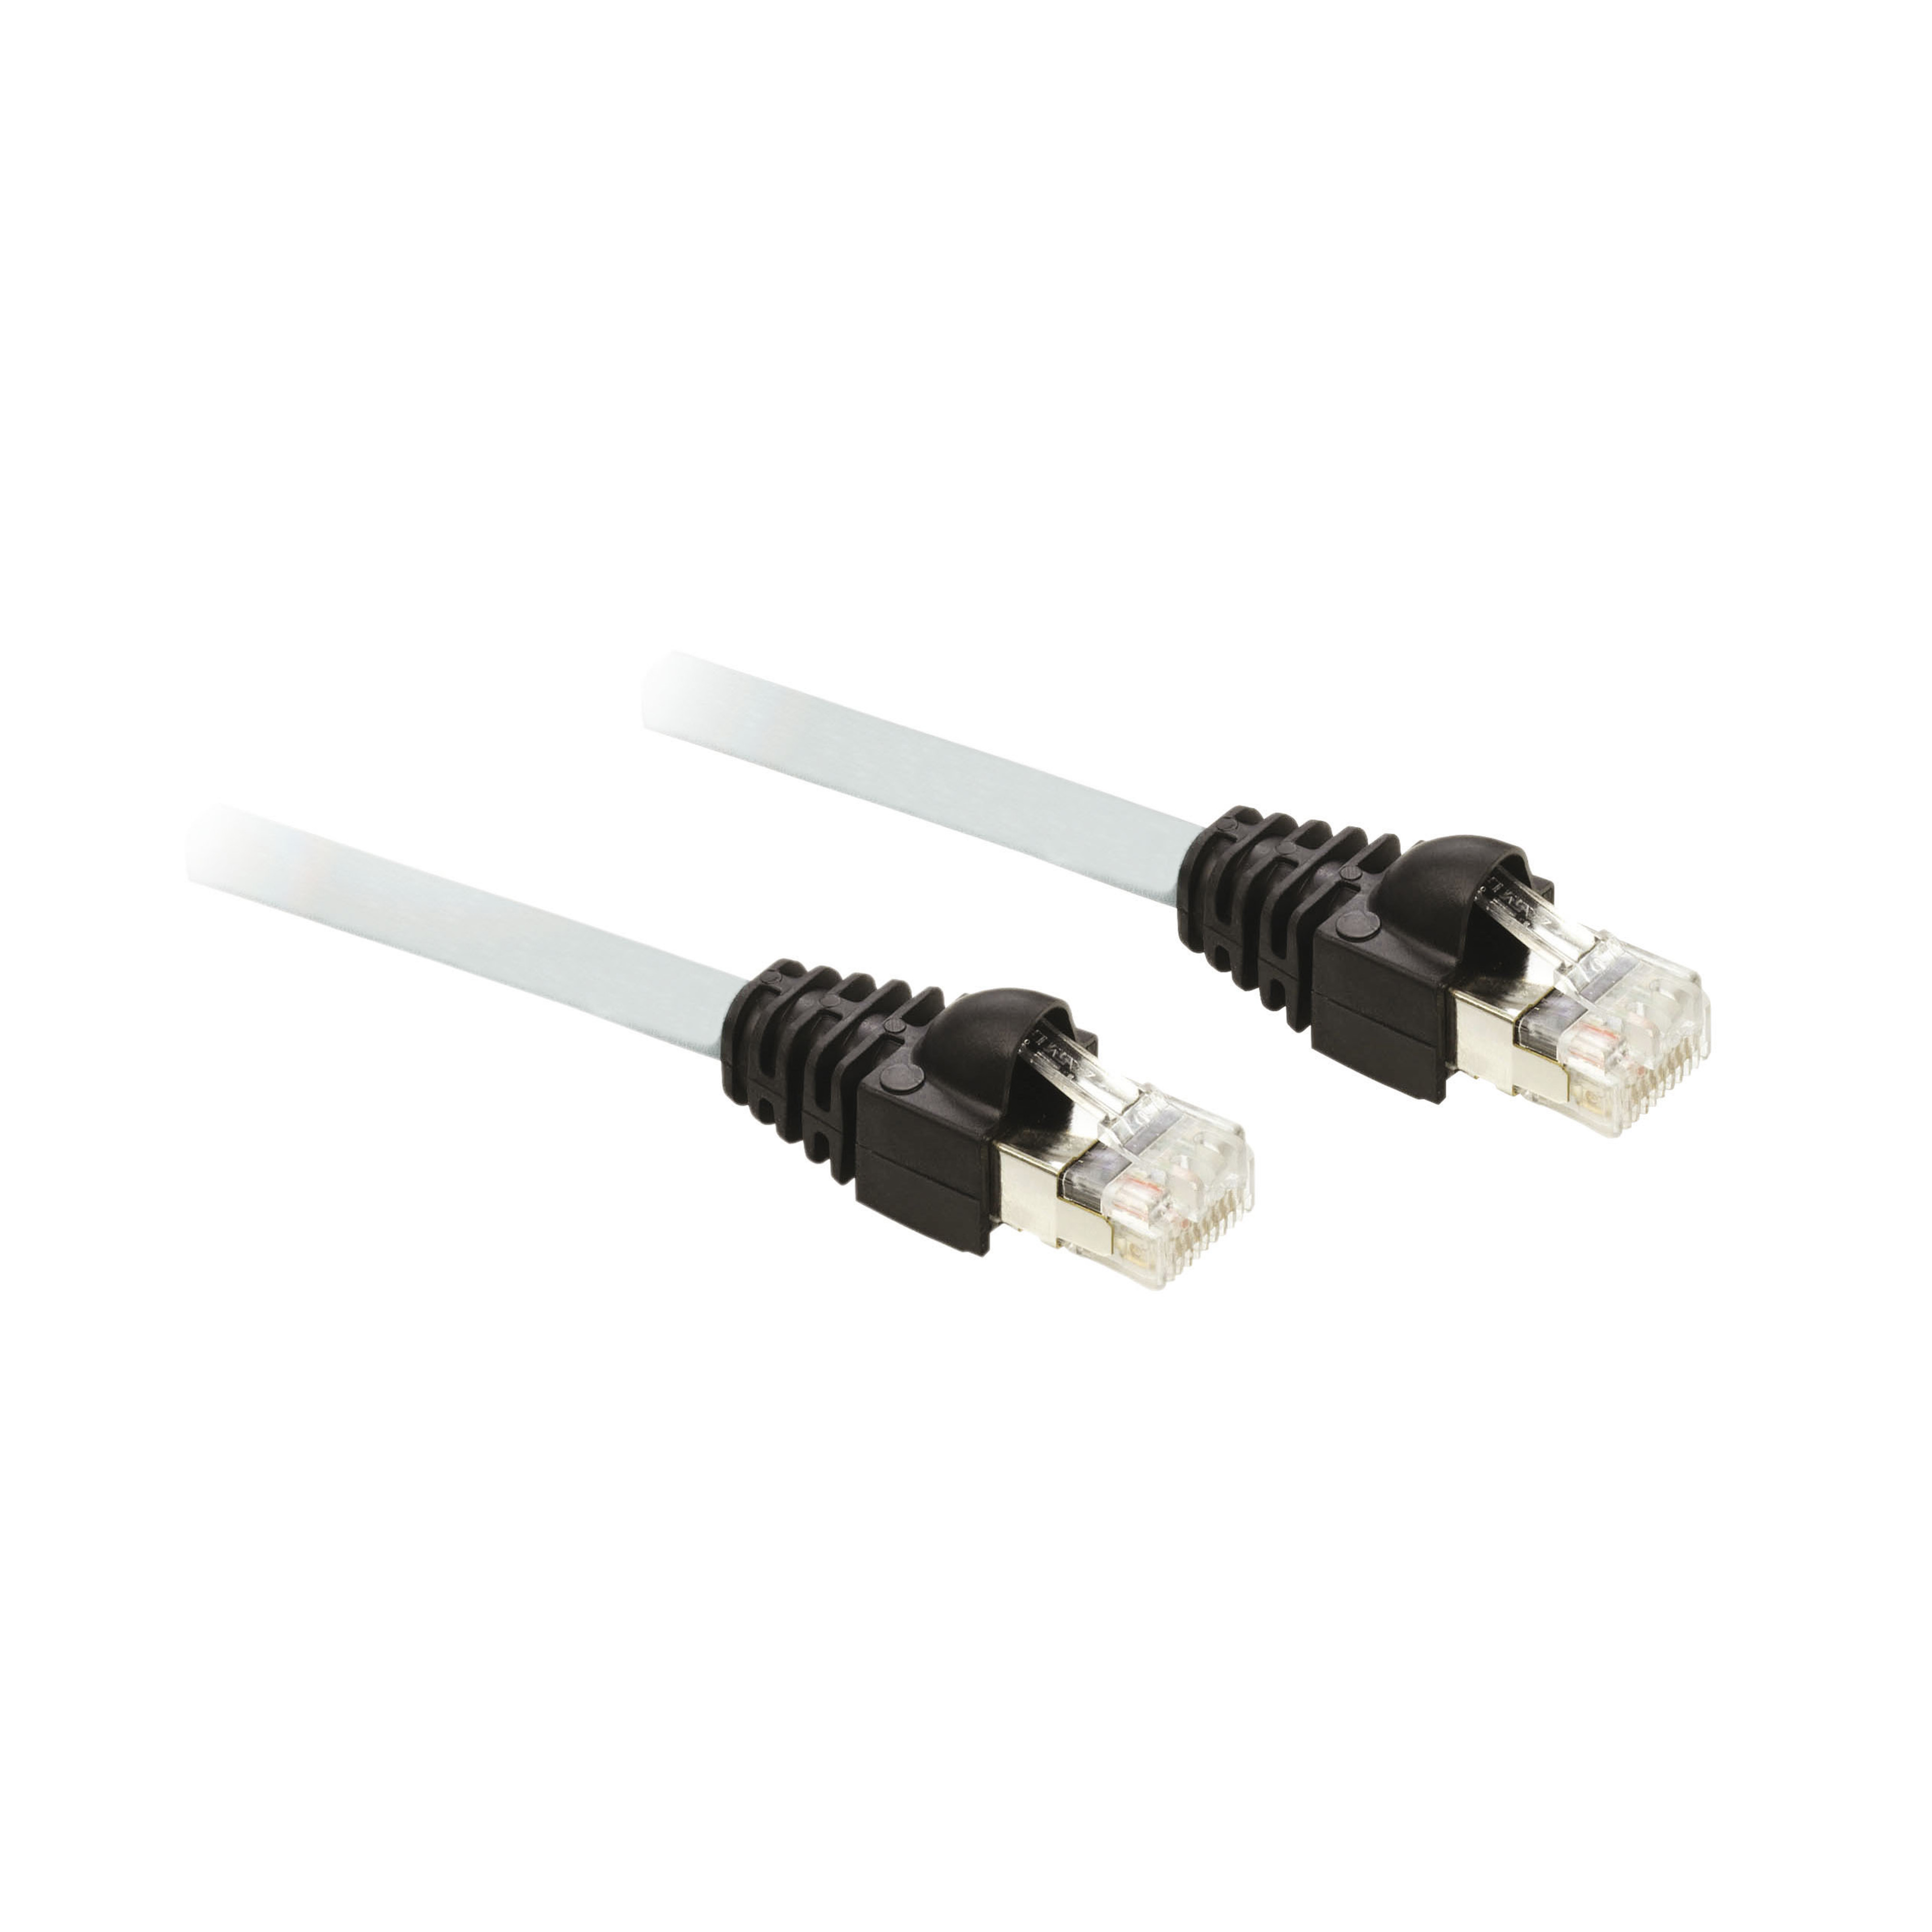 CABLE 30CM